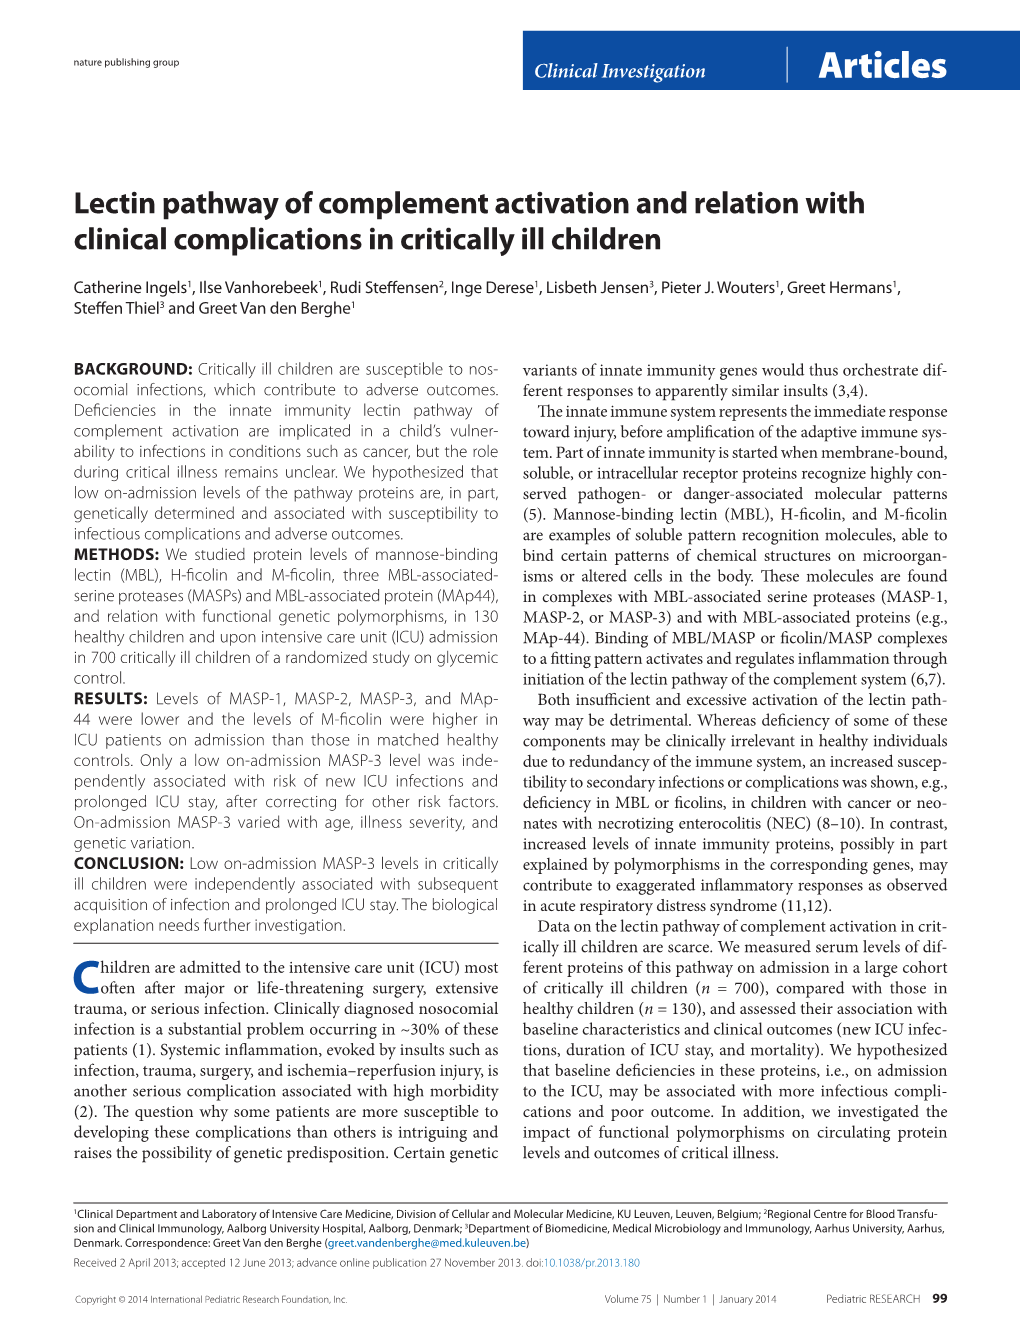 Lectin Pathway of Complement Activation and Relation with Clinical Complications in Critically Ill Children